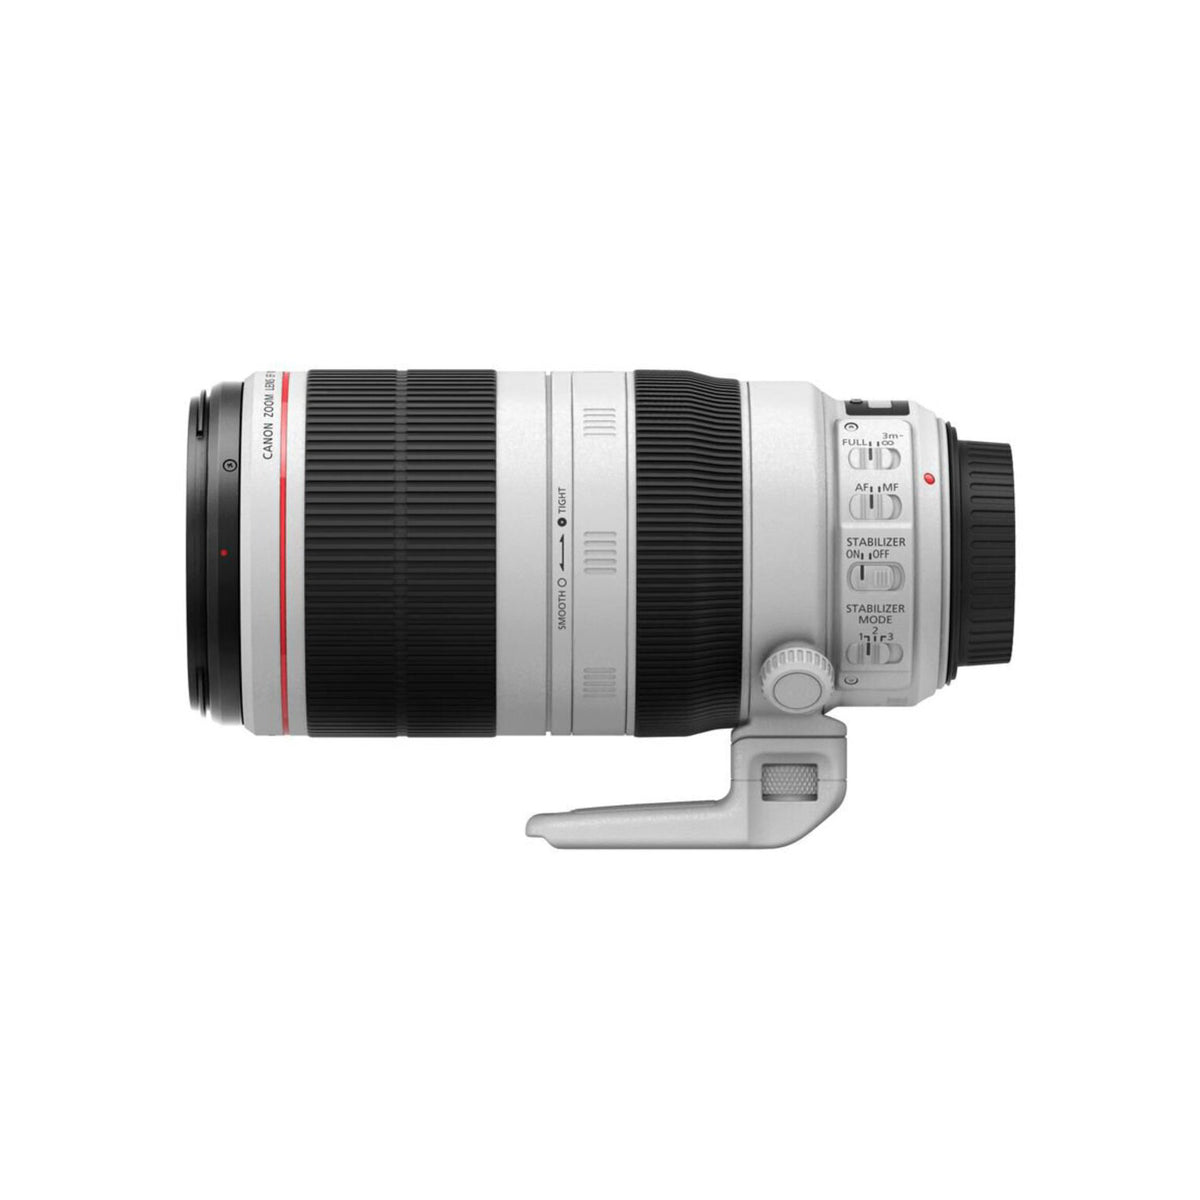 Canon EF 100-400mm F4.5-5.6 L IS USM